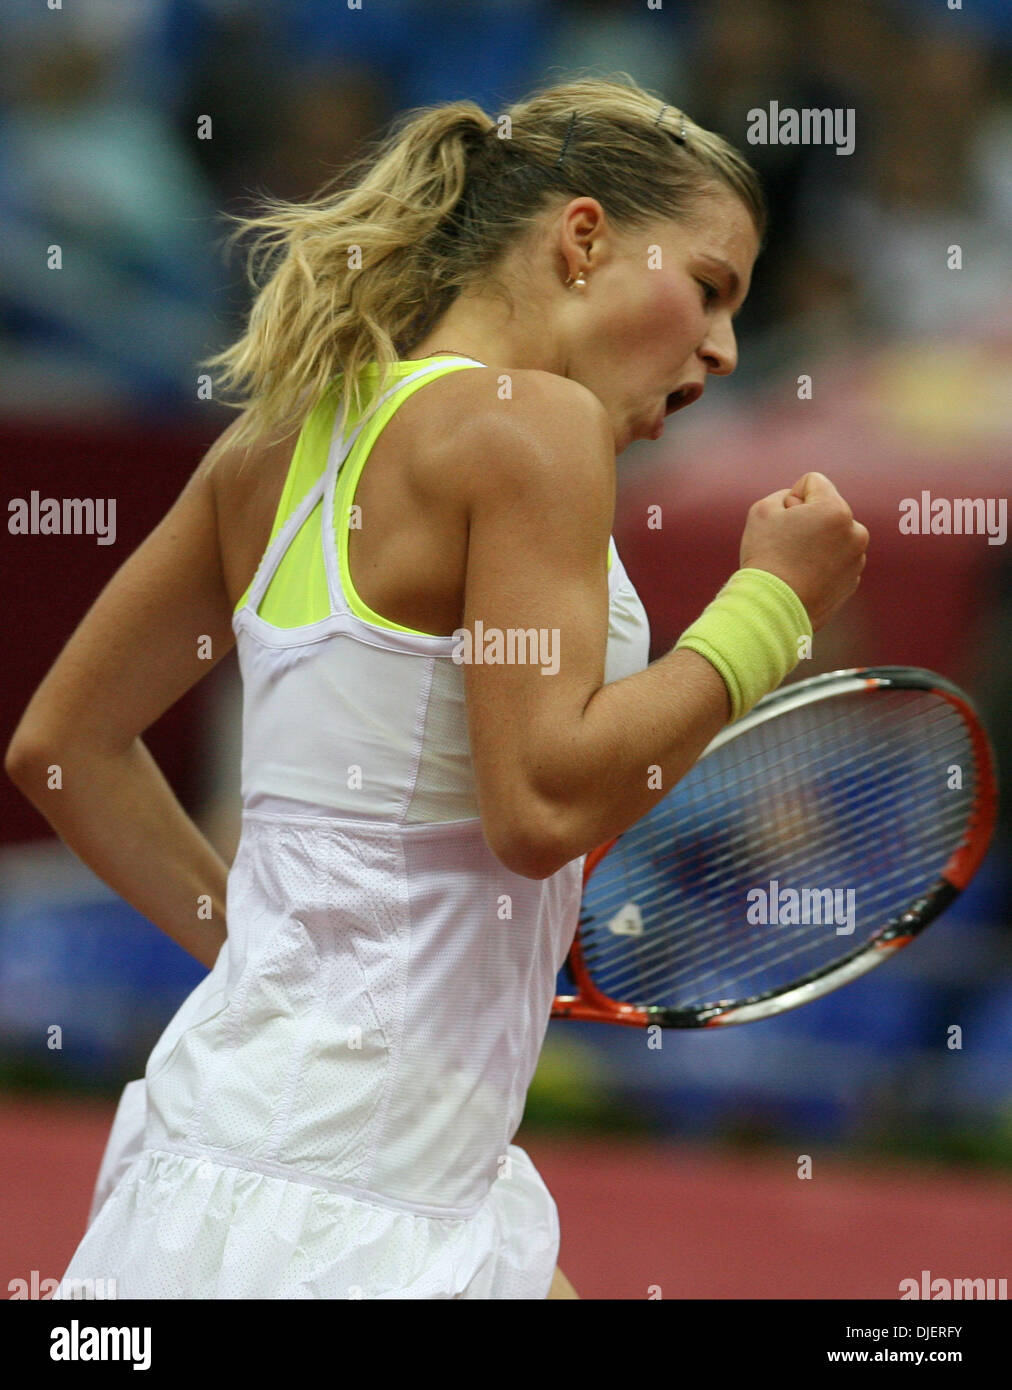 Oct 09, 2007 - Moscow, Russia - Russian tennis player MARIA KIRILENKO during the 2007 Kremlin Cup tennis tournament in Moscow. (Credit Image: © PhotoXpress/ZUMA Press) RESTRICTIONS: North and South America RIGHTS ONLY! Stock Photo